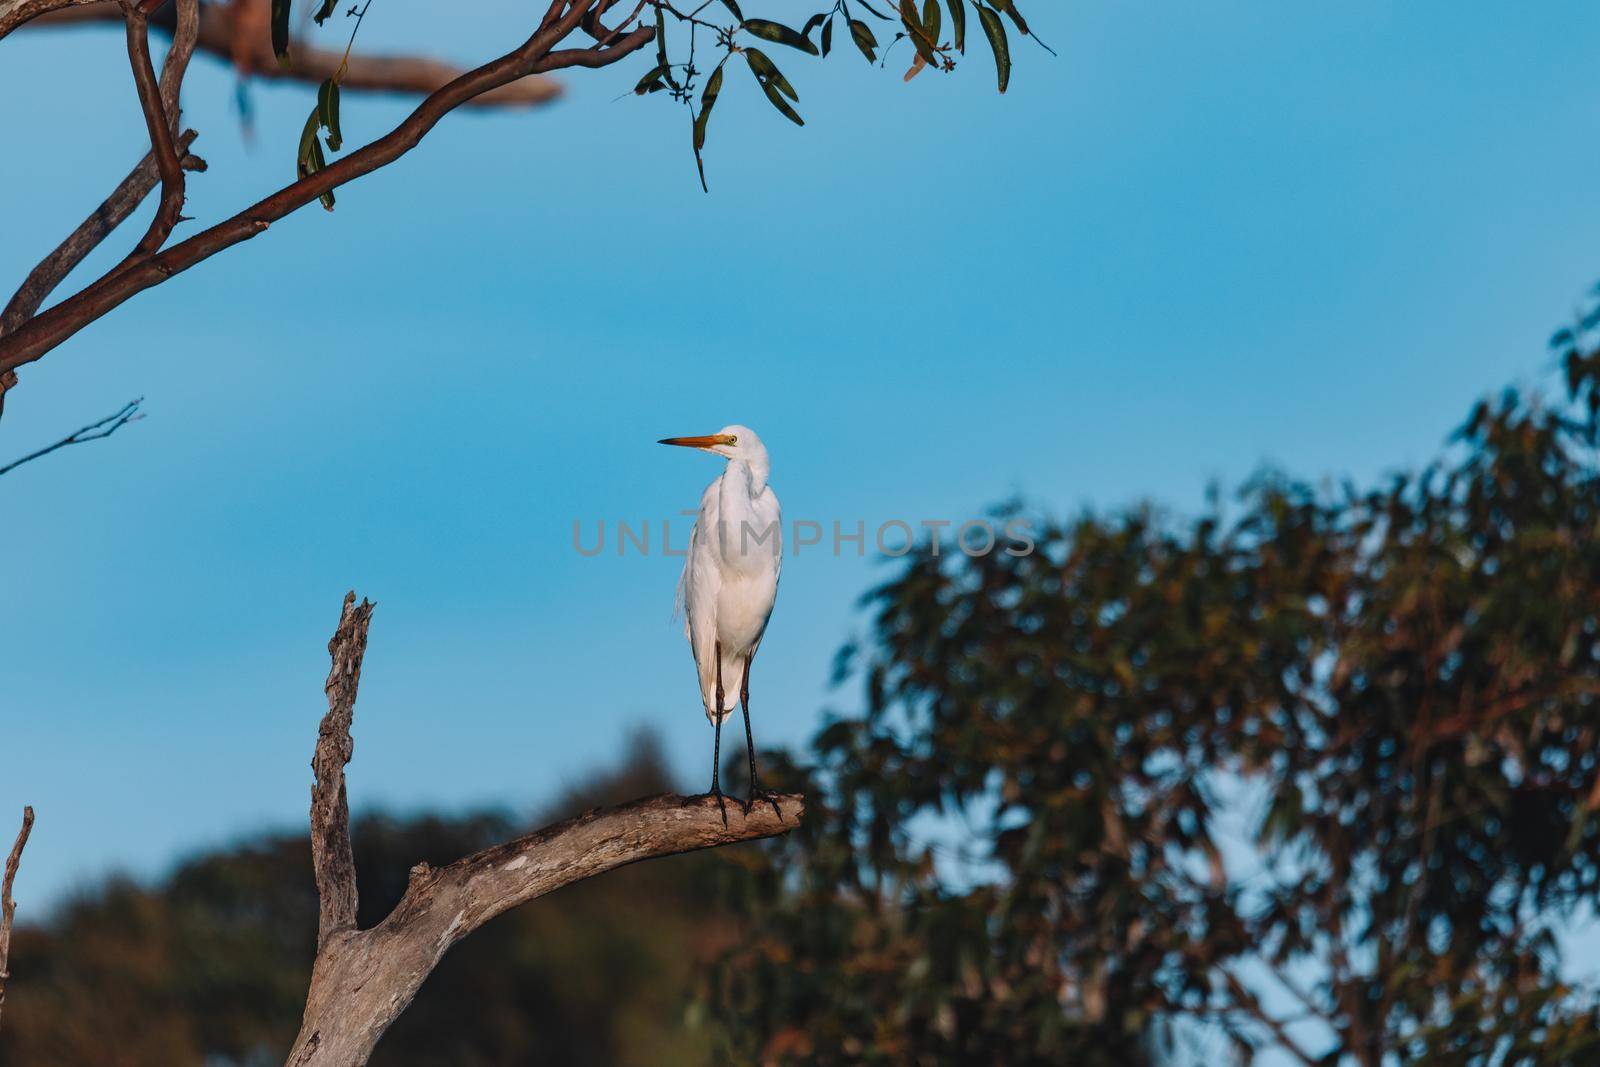 A Great Egret resting in the tree by braydenstanfordphoto